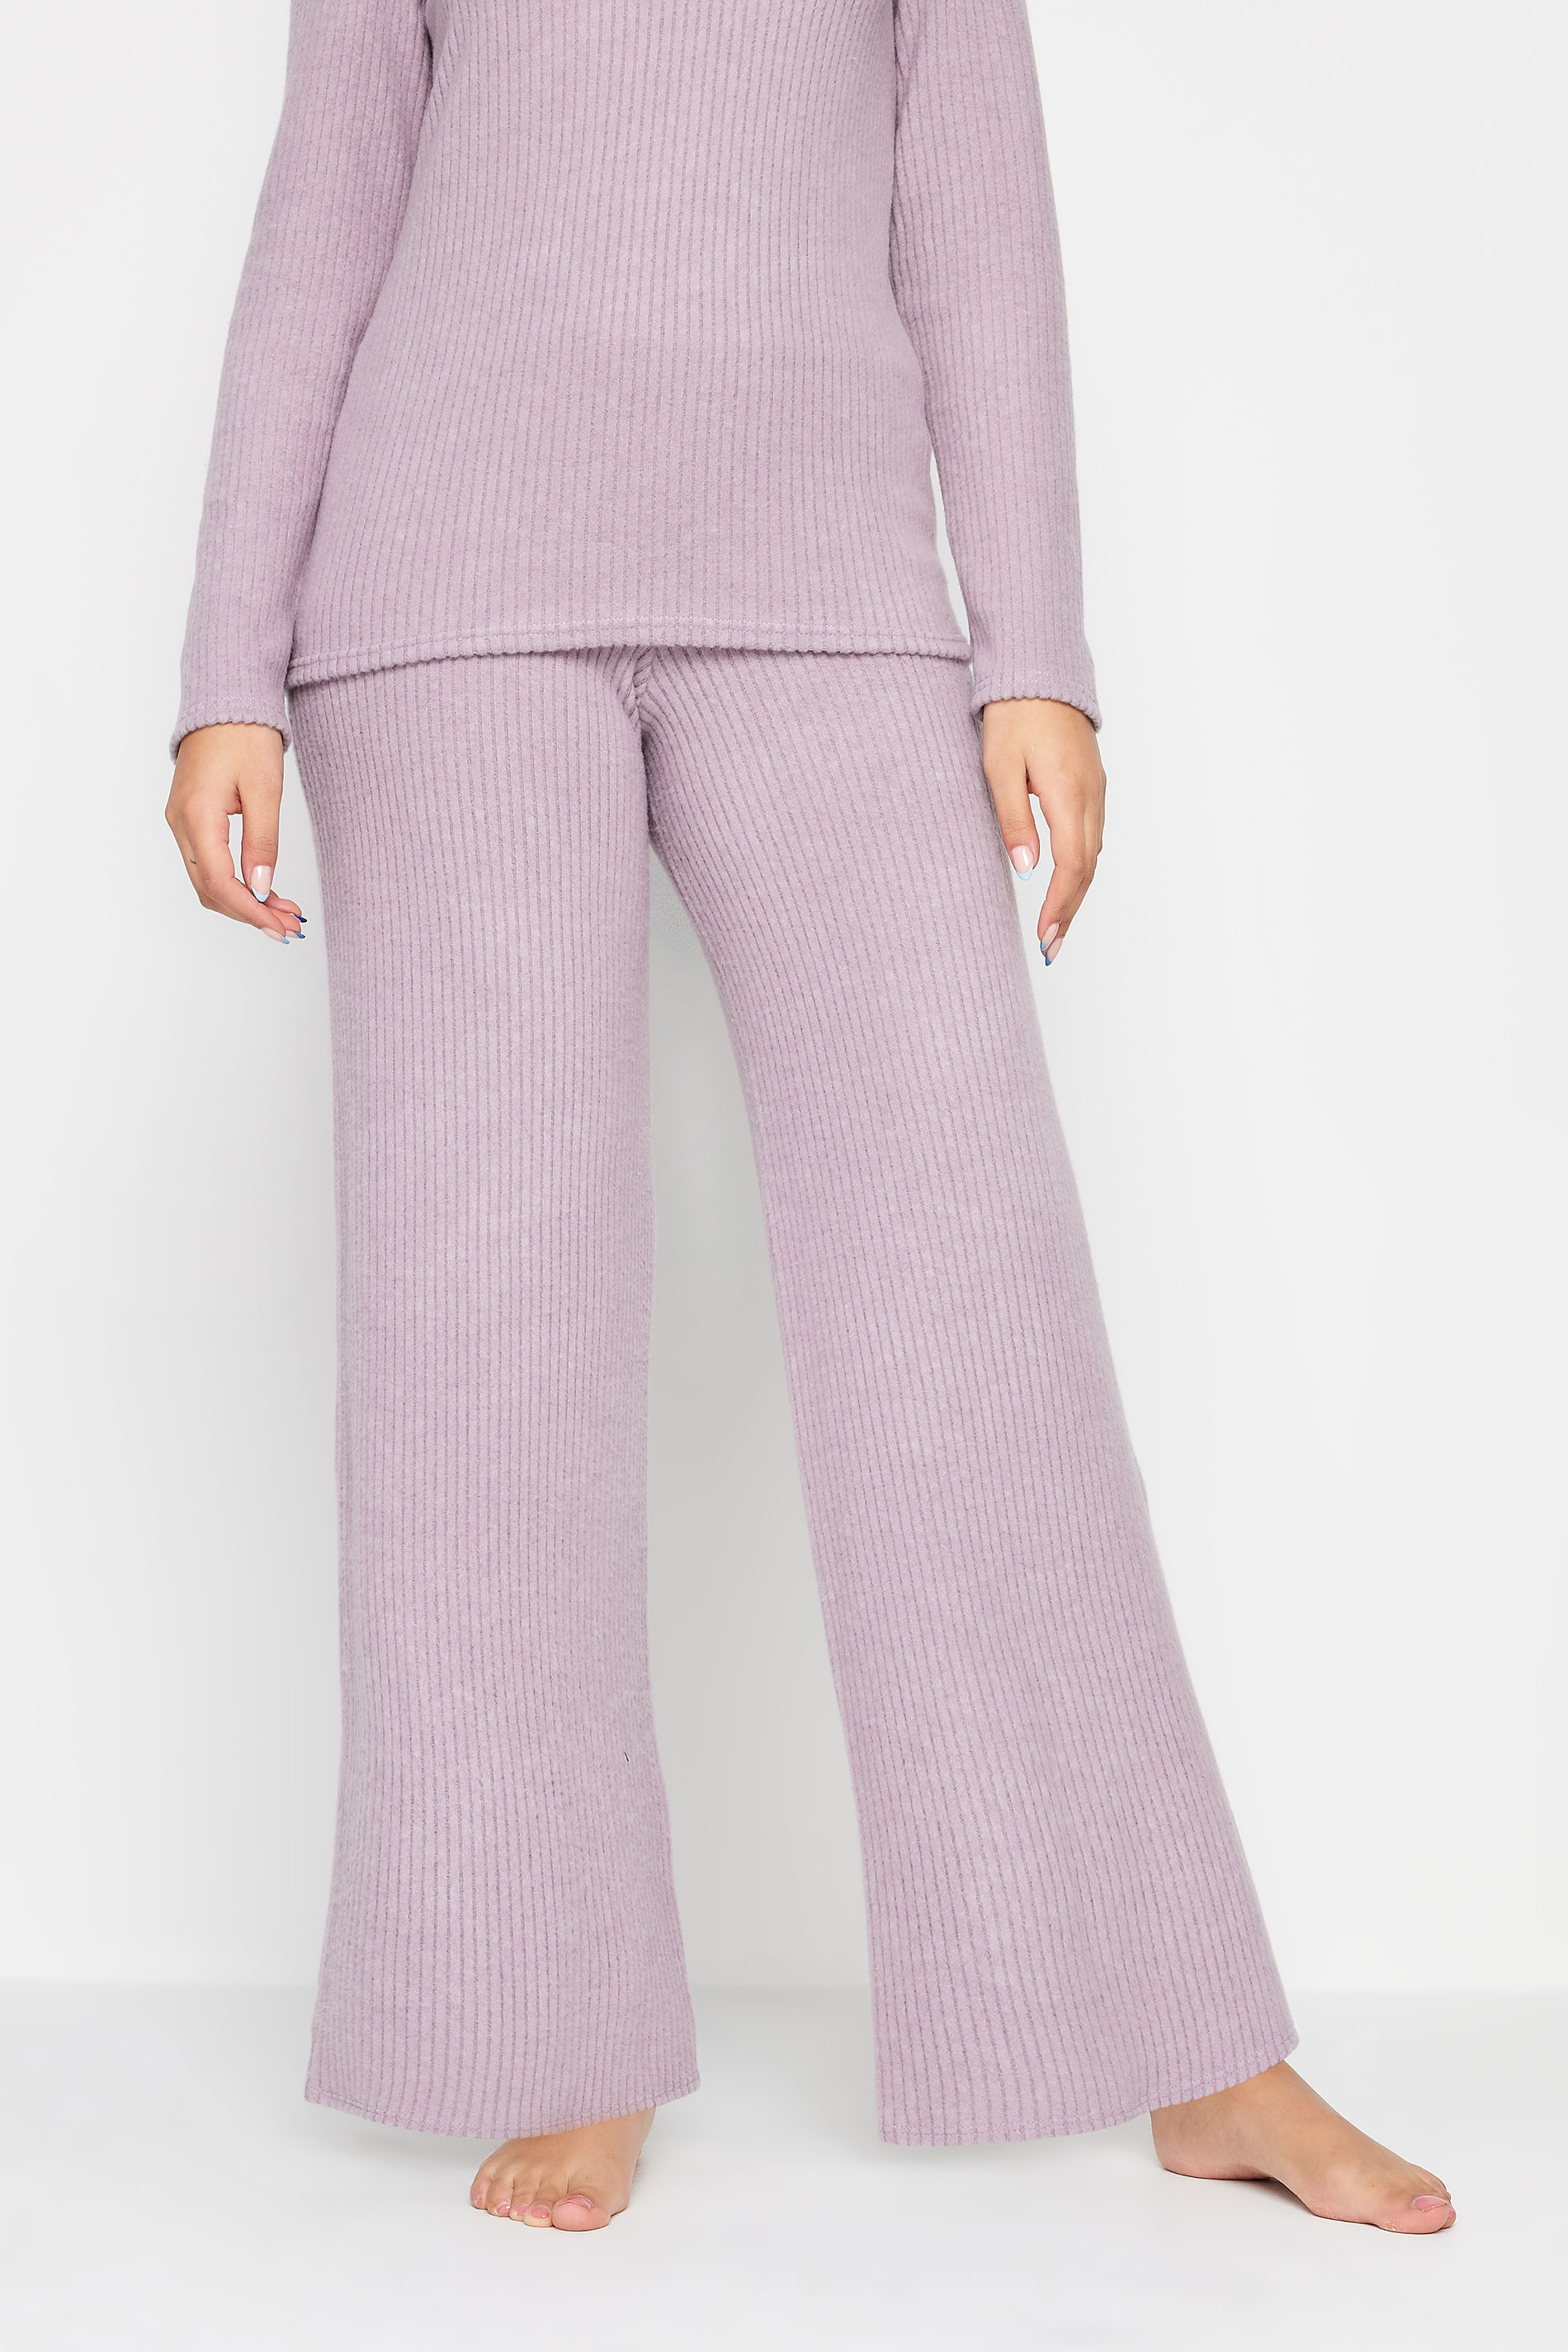 LTS Tall Blush Pink Ribbed Wide Leg Knitted Leggings | Long Tall Sally  1